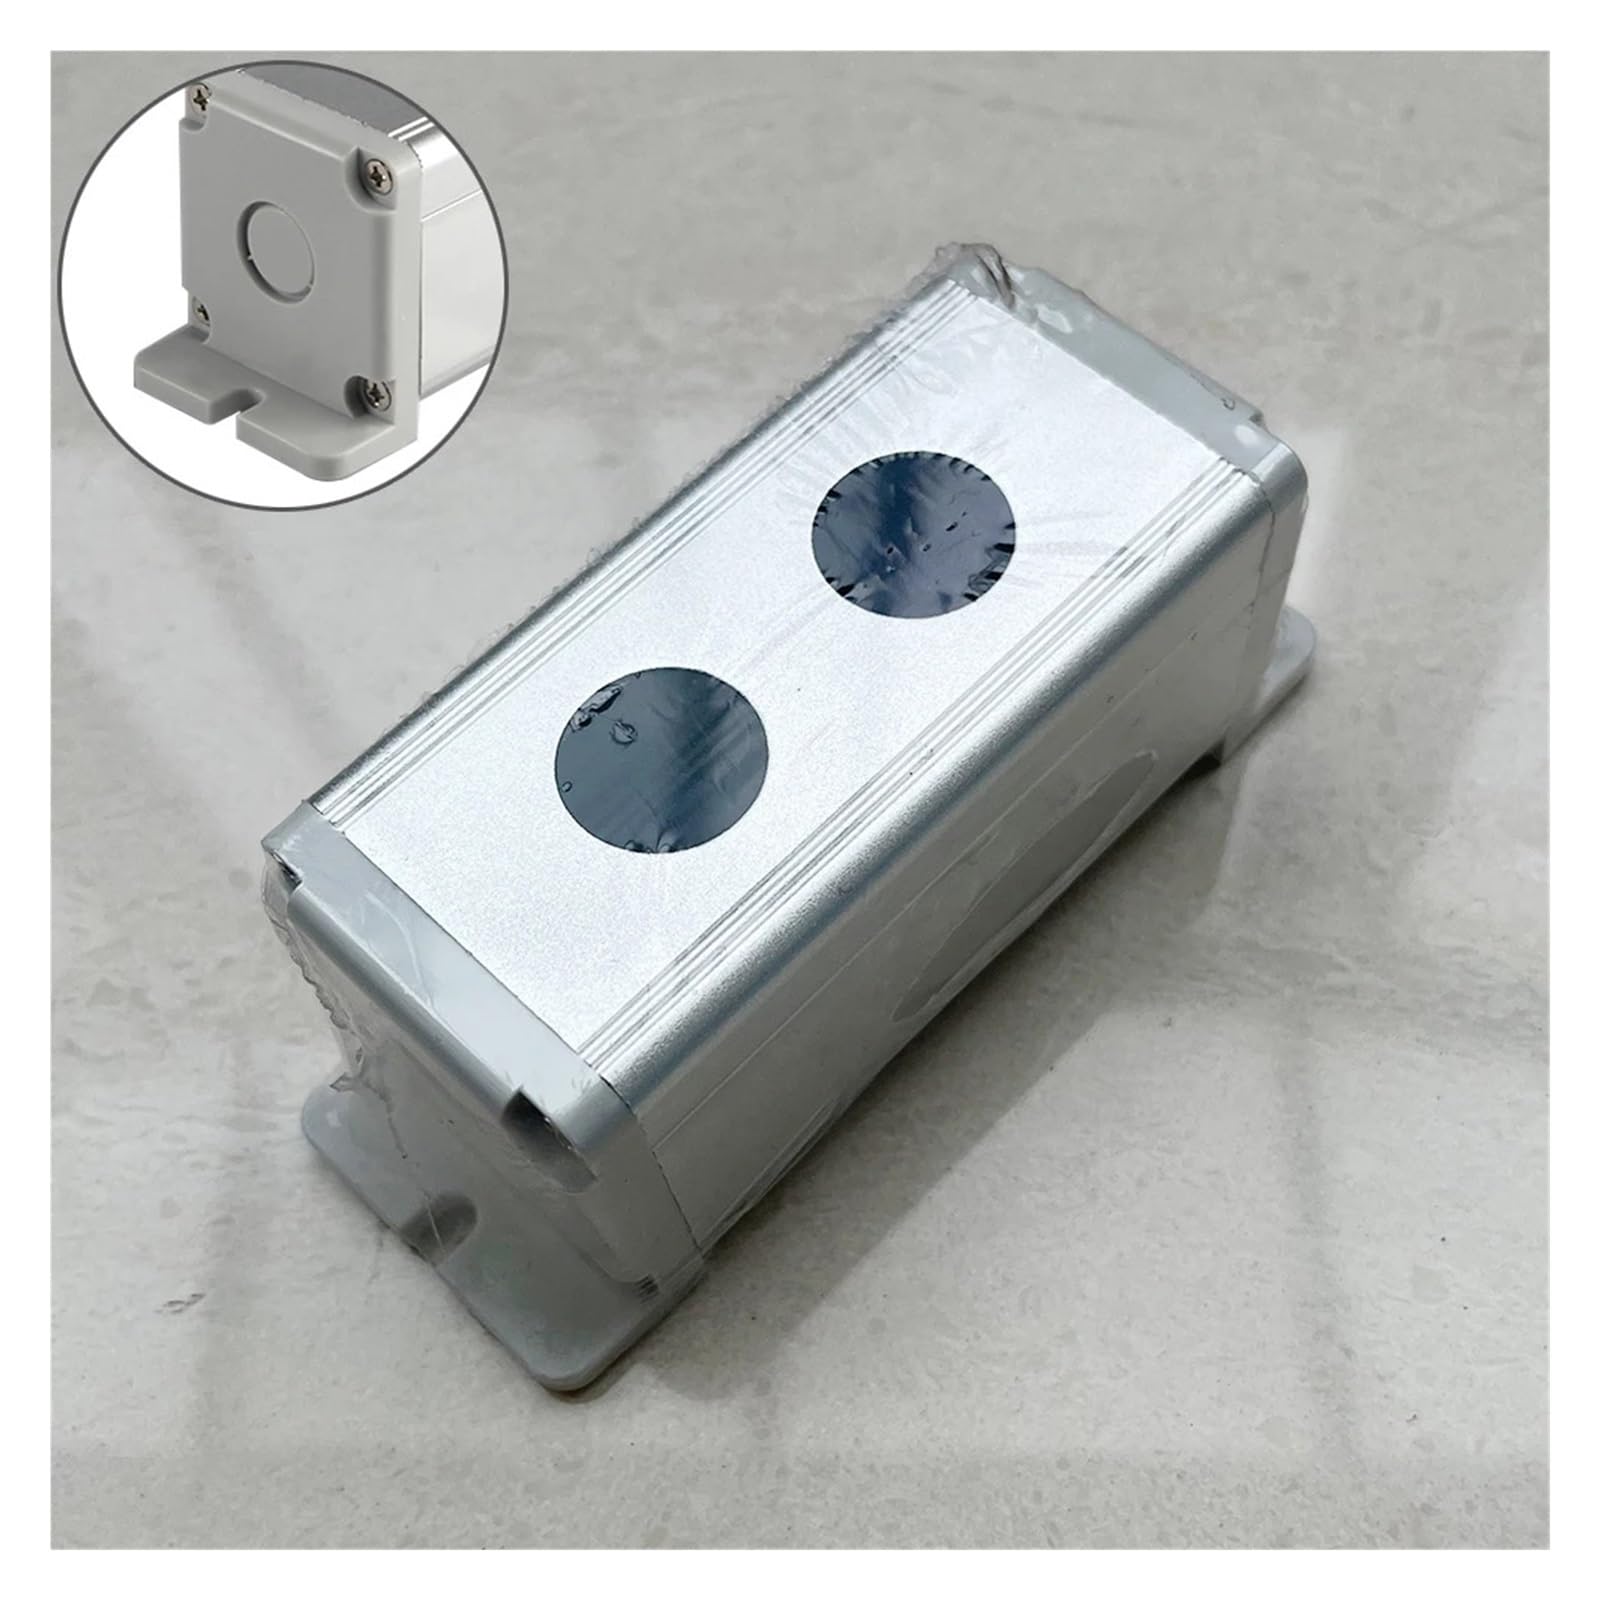 16mm 19mm 22mm Waterproof Aluminium Push Button Switch Box for Metal Buttons Industrial Control Equipment 1 2 3 4 5 6 Hole ZMBMNNWQ(2 Hole With Ear,16MM) von ZMBMNNWQ